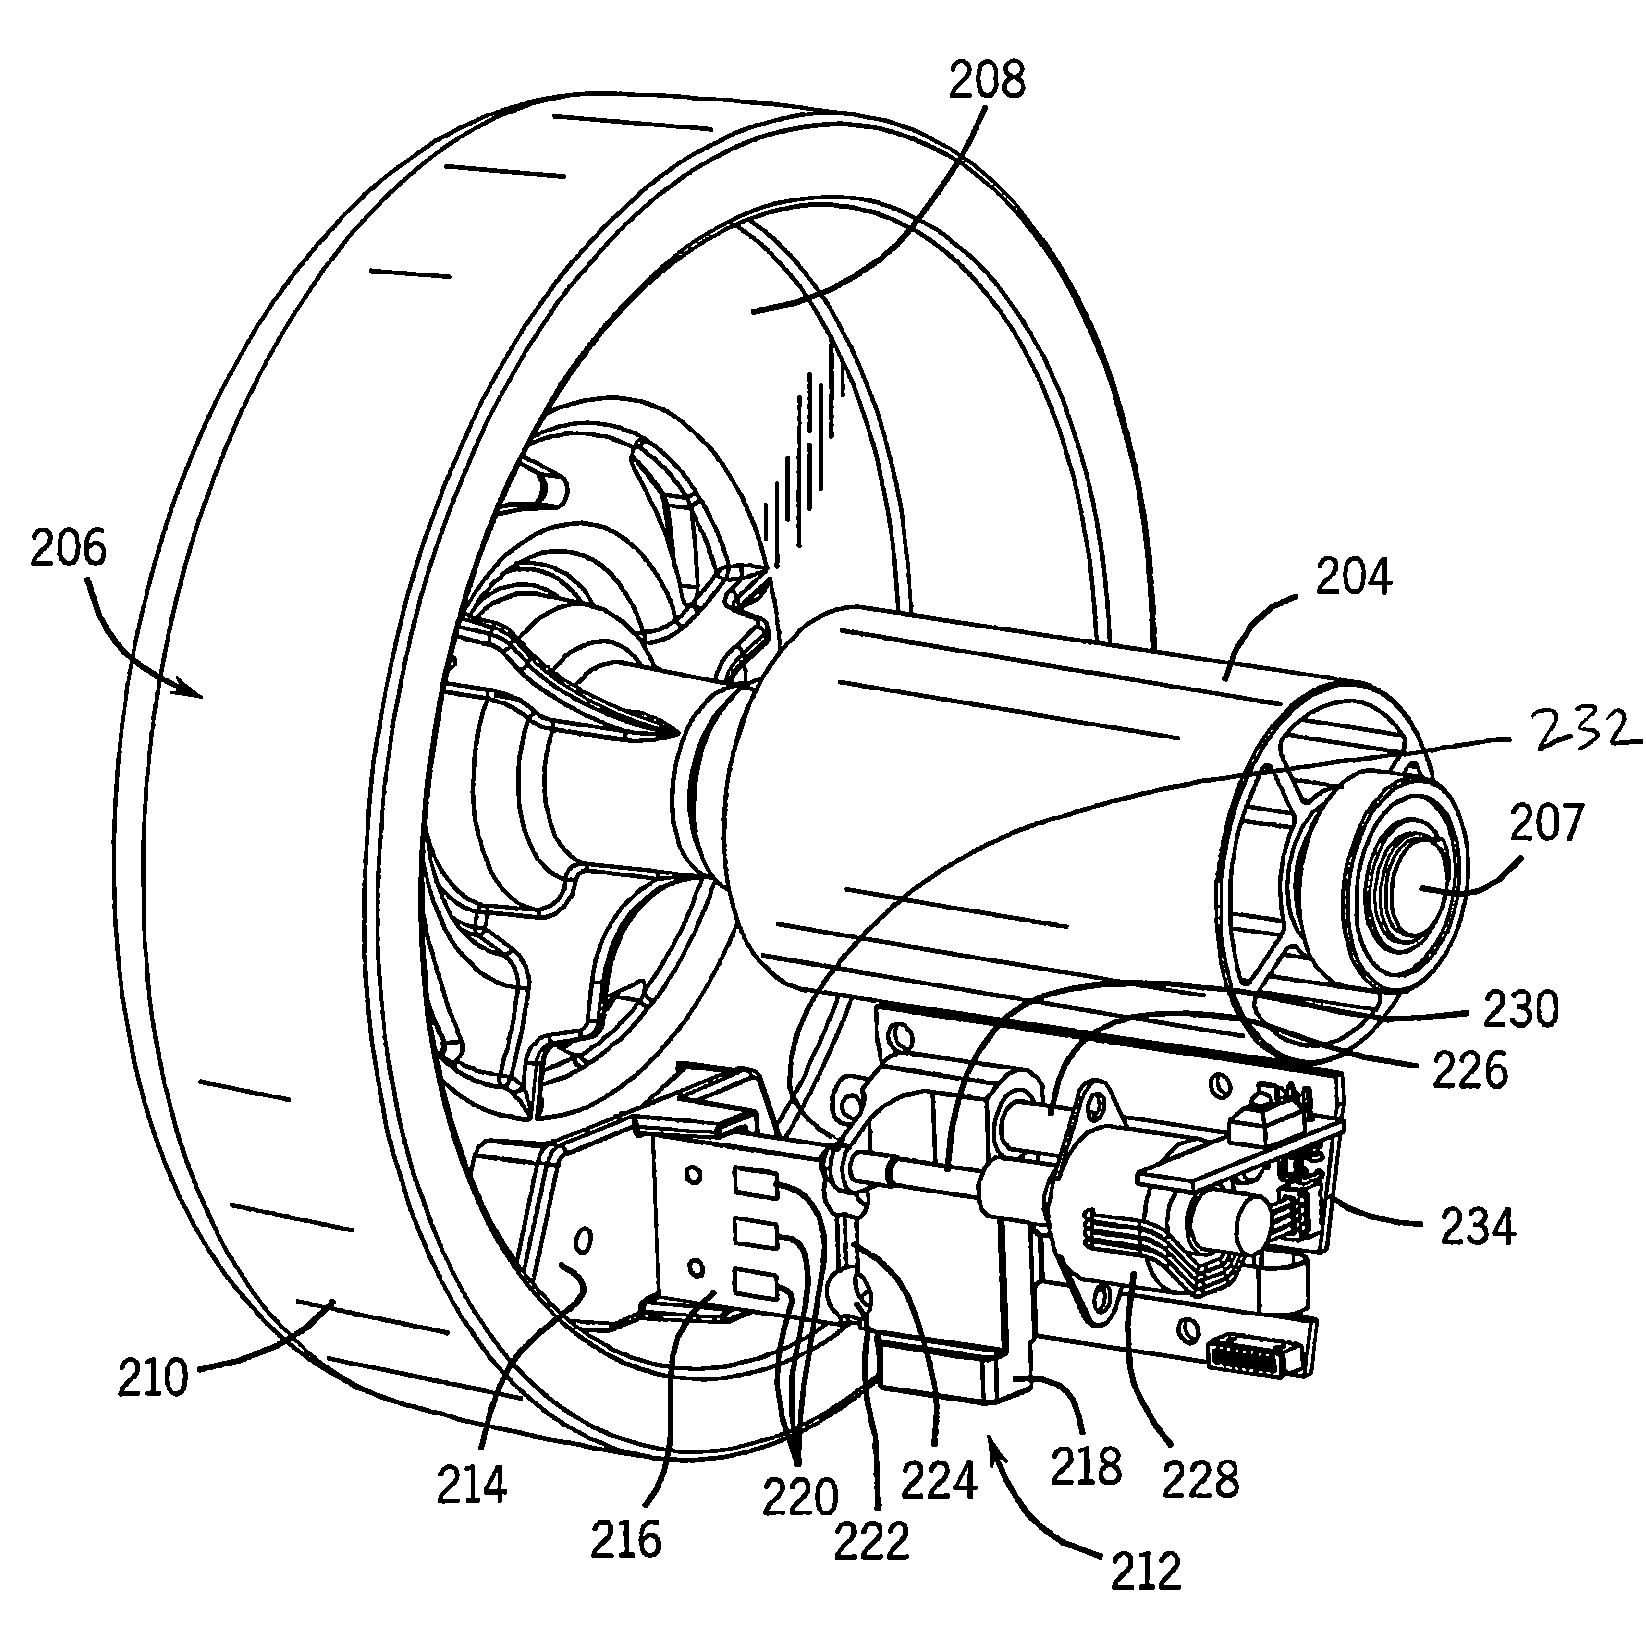 Power sensing eddy current resistance unit for an exercise device